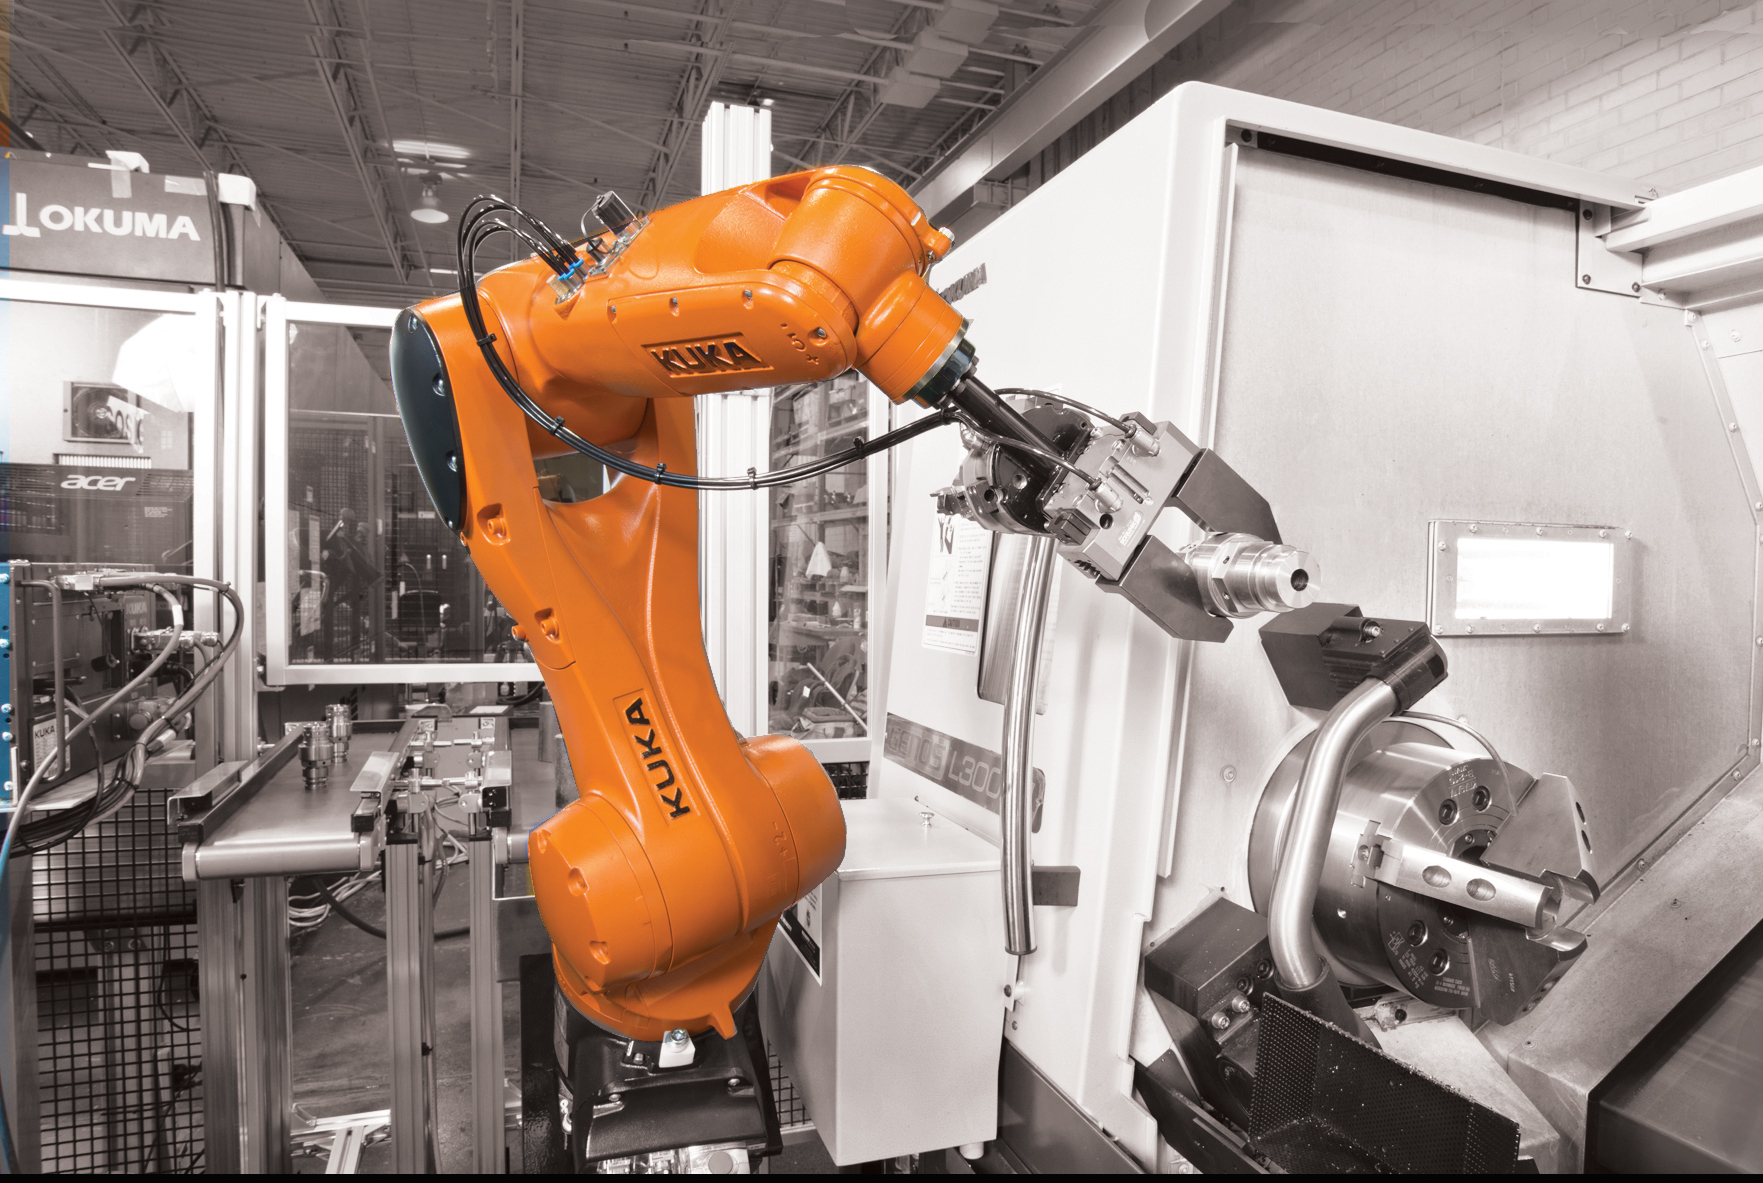 See Load it, Cut Weld it!” at IMTS 2014 with KUKA Robotics Corporation Business